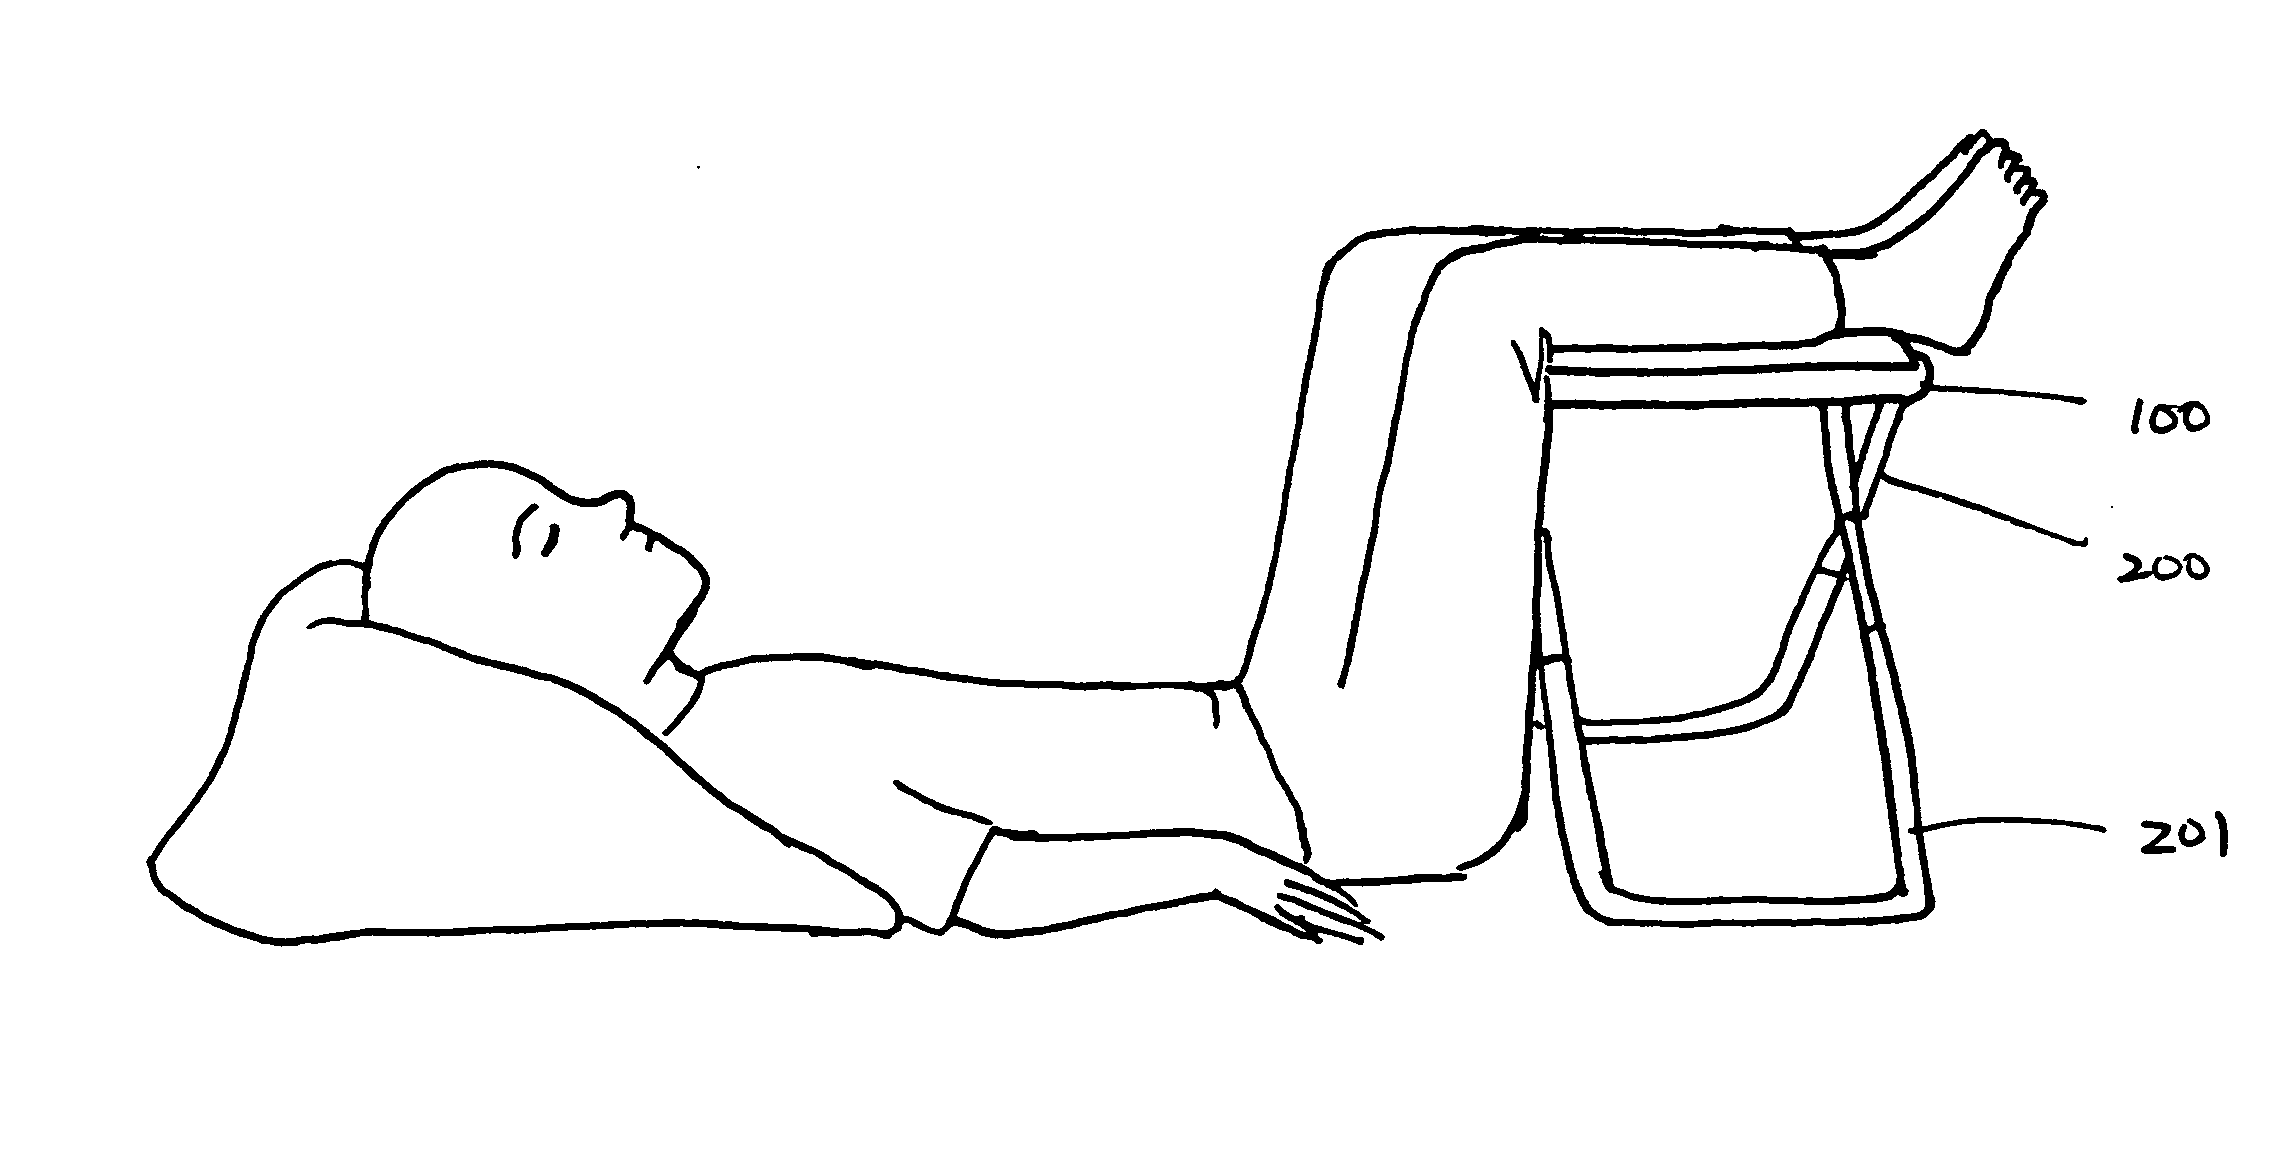 Device and method for relieving back pain